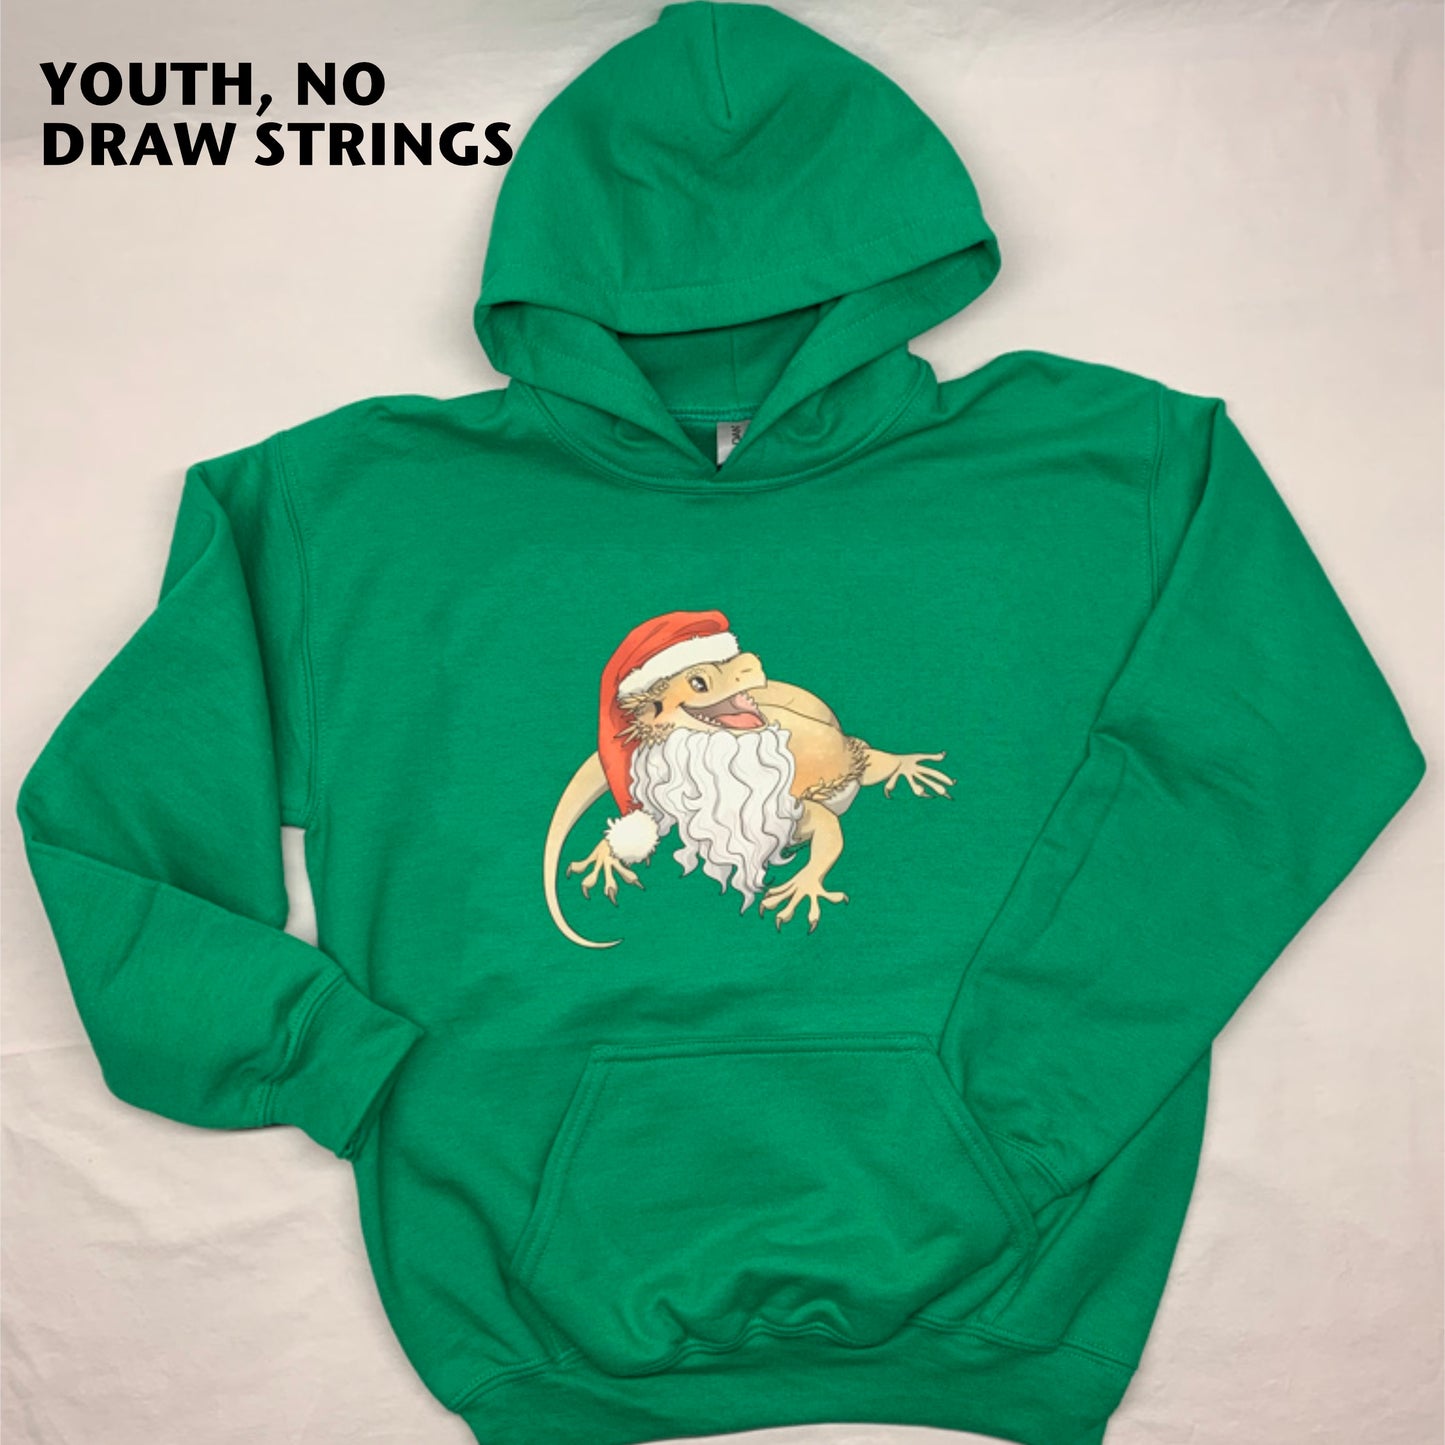 A photo of Amphisbaena Exotics original art of a cartoon realistic bearded dragon, smiling and wearing a Santa hat and beard on a Kelly green pullover hoodie, showing that the youth sizes do not have drawstrings in the hoodie. Christmas themed.